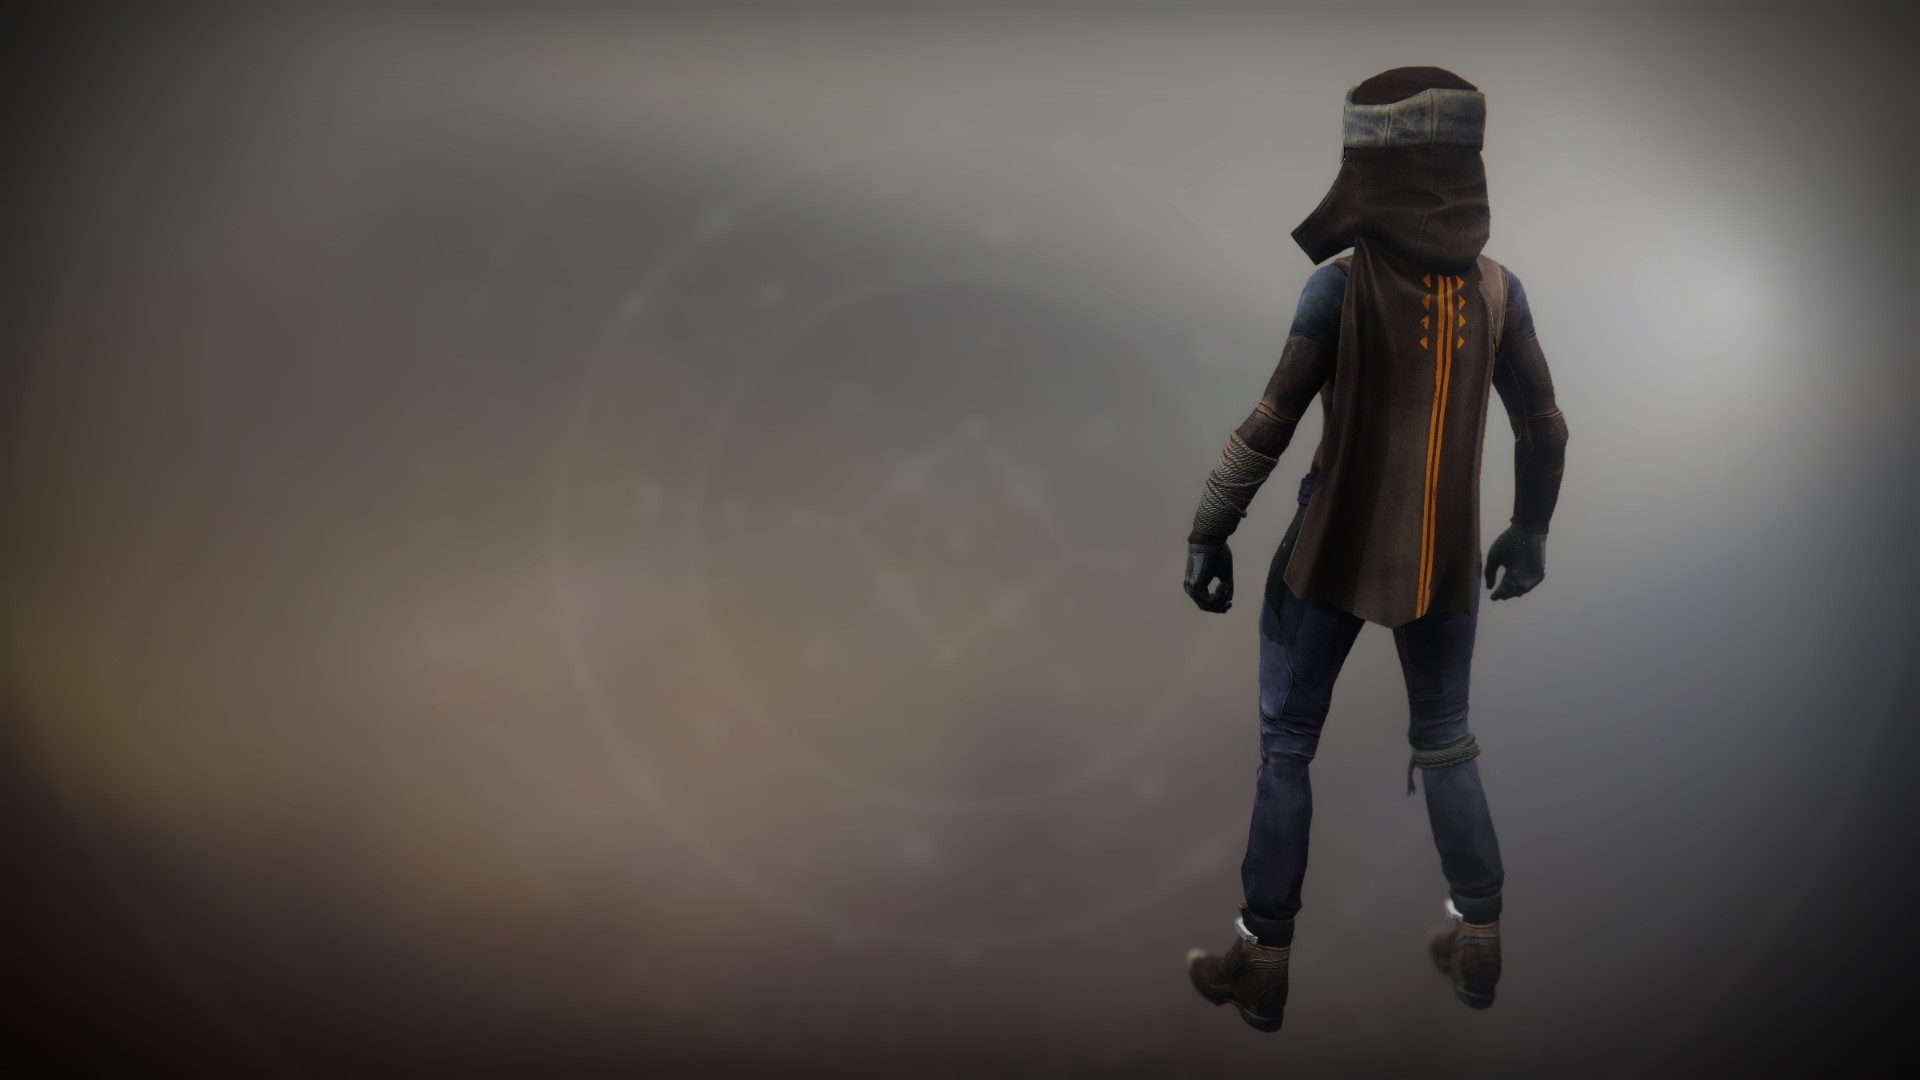 An in-game render of the Seventh Seraph Cloak.